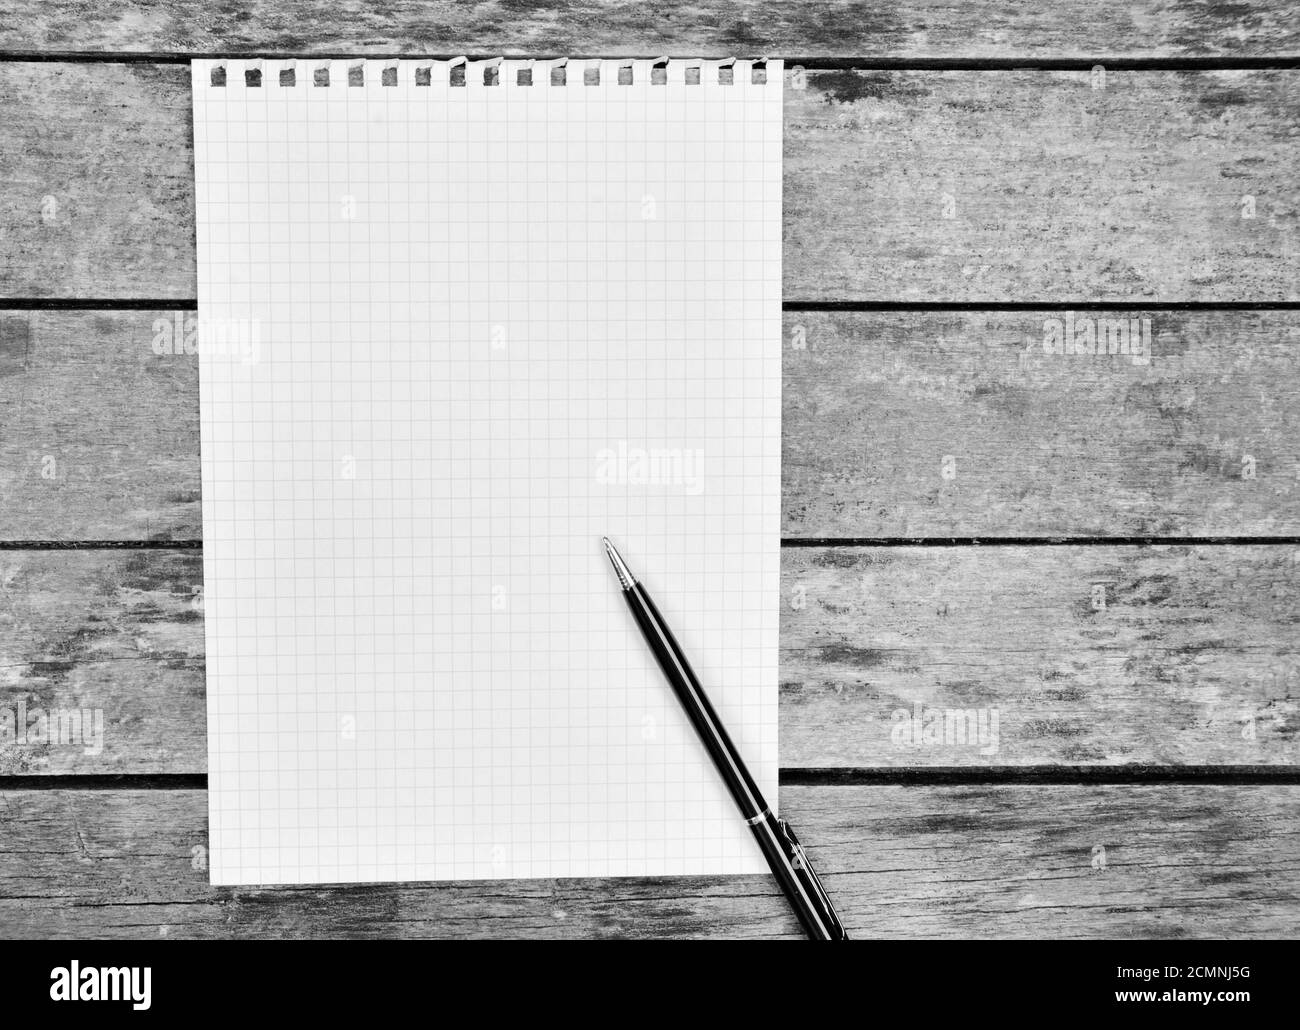 Empty paper with pen on an old wooden table Stock Photo